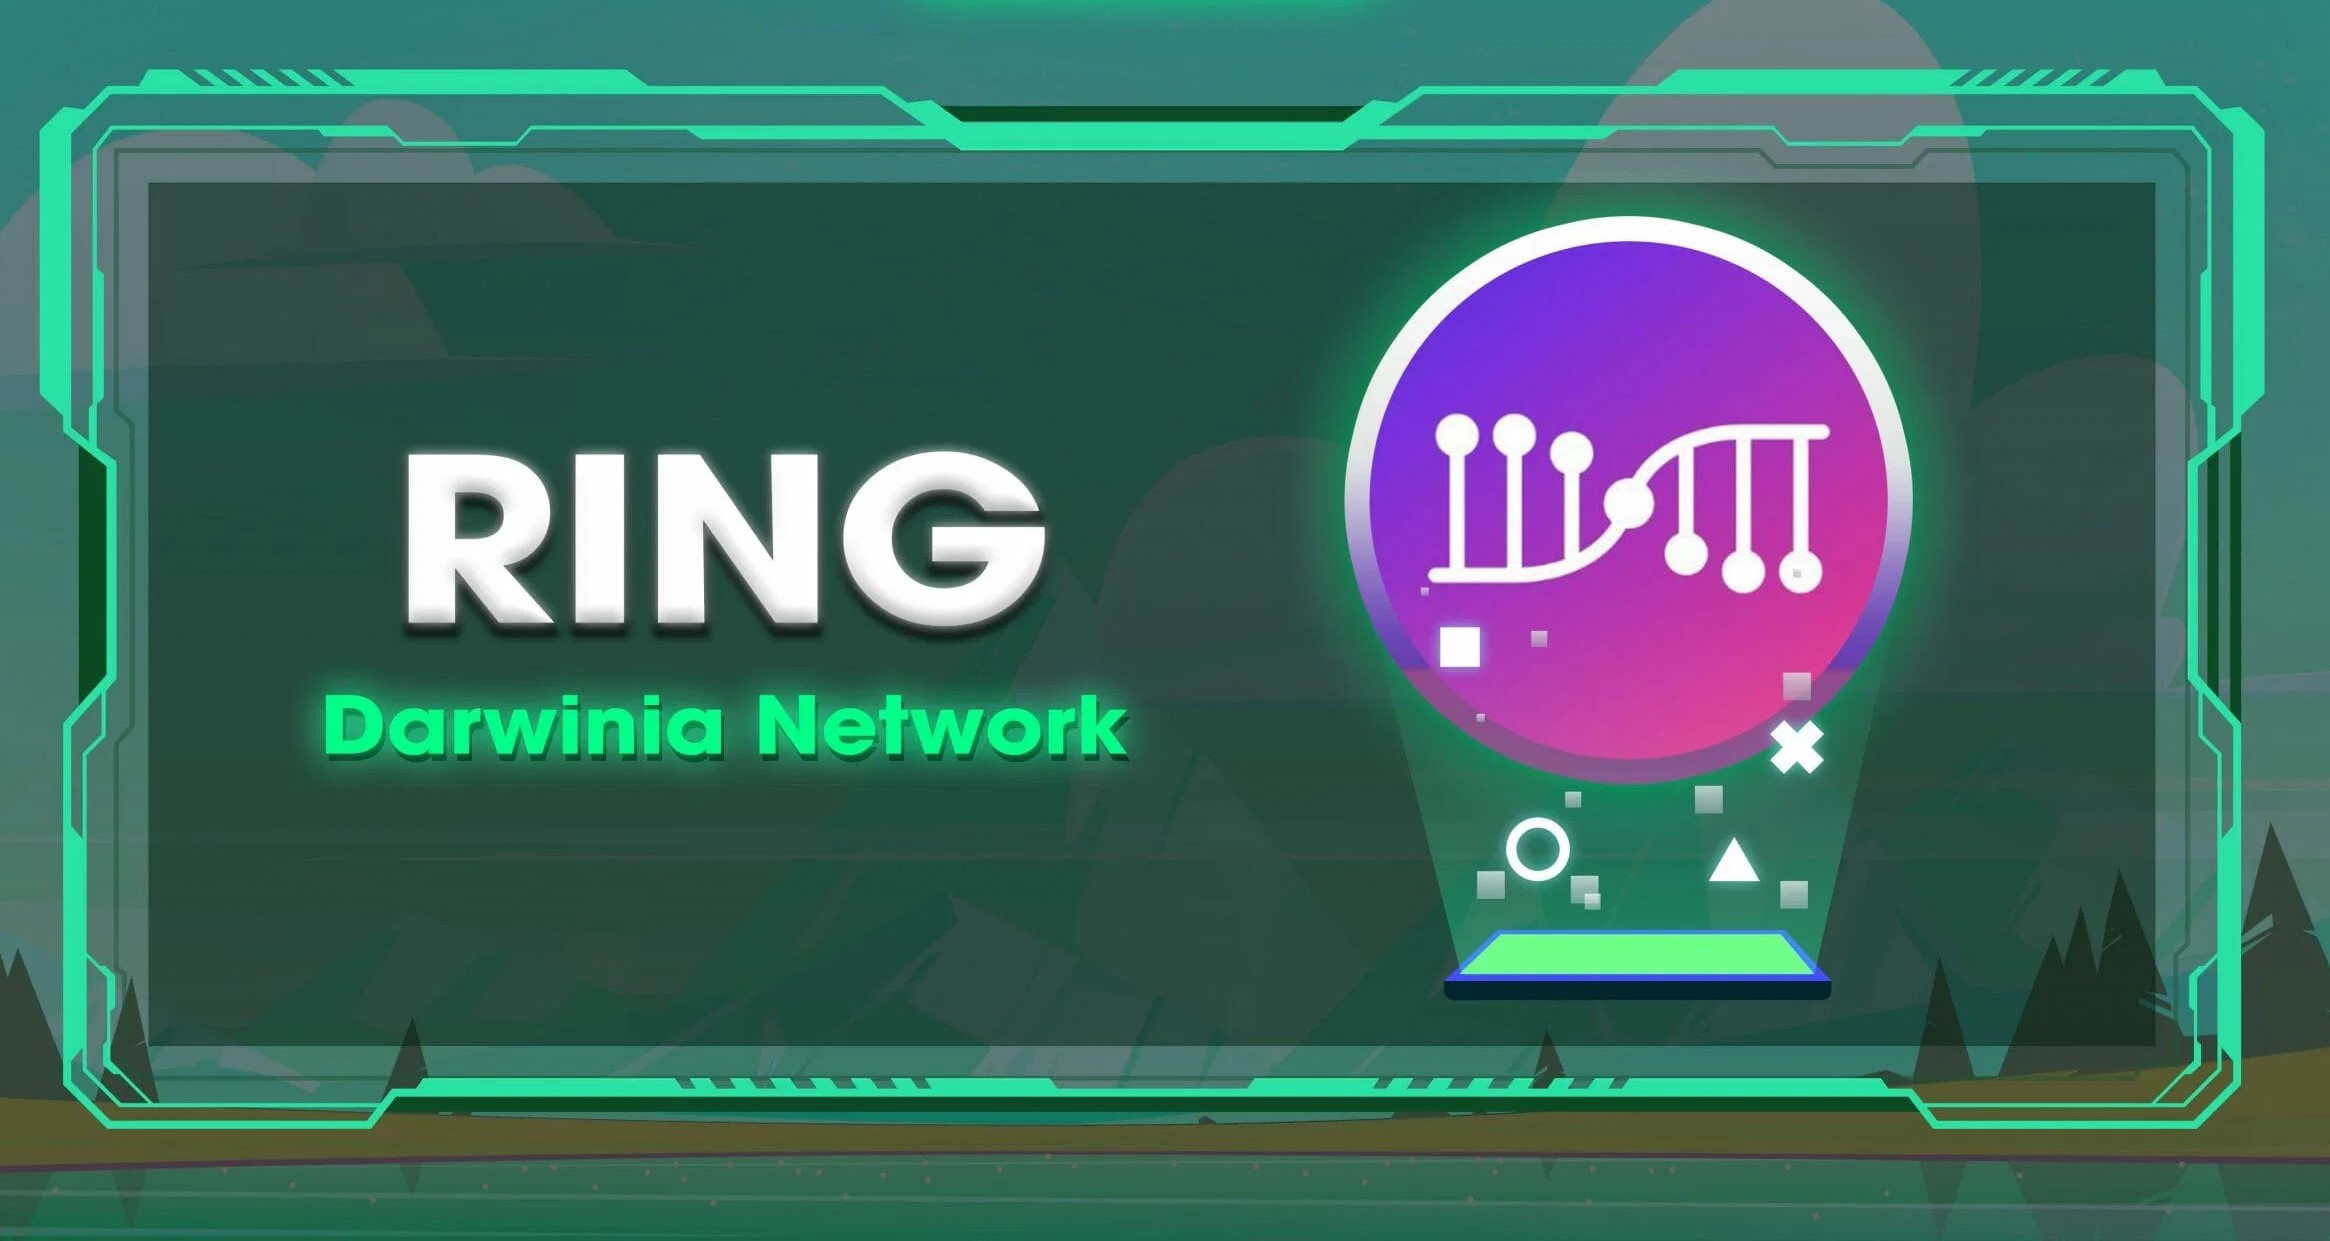 12-captivating-facts-about-darwinia-network-ring